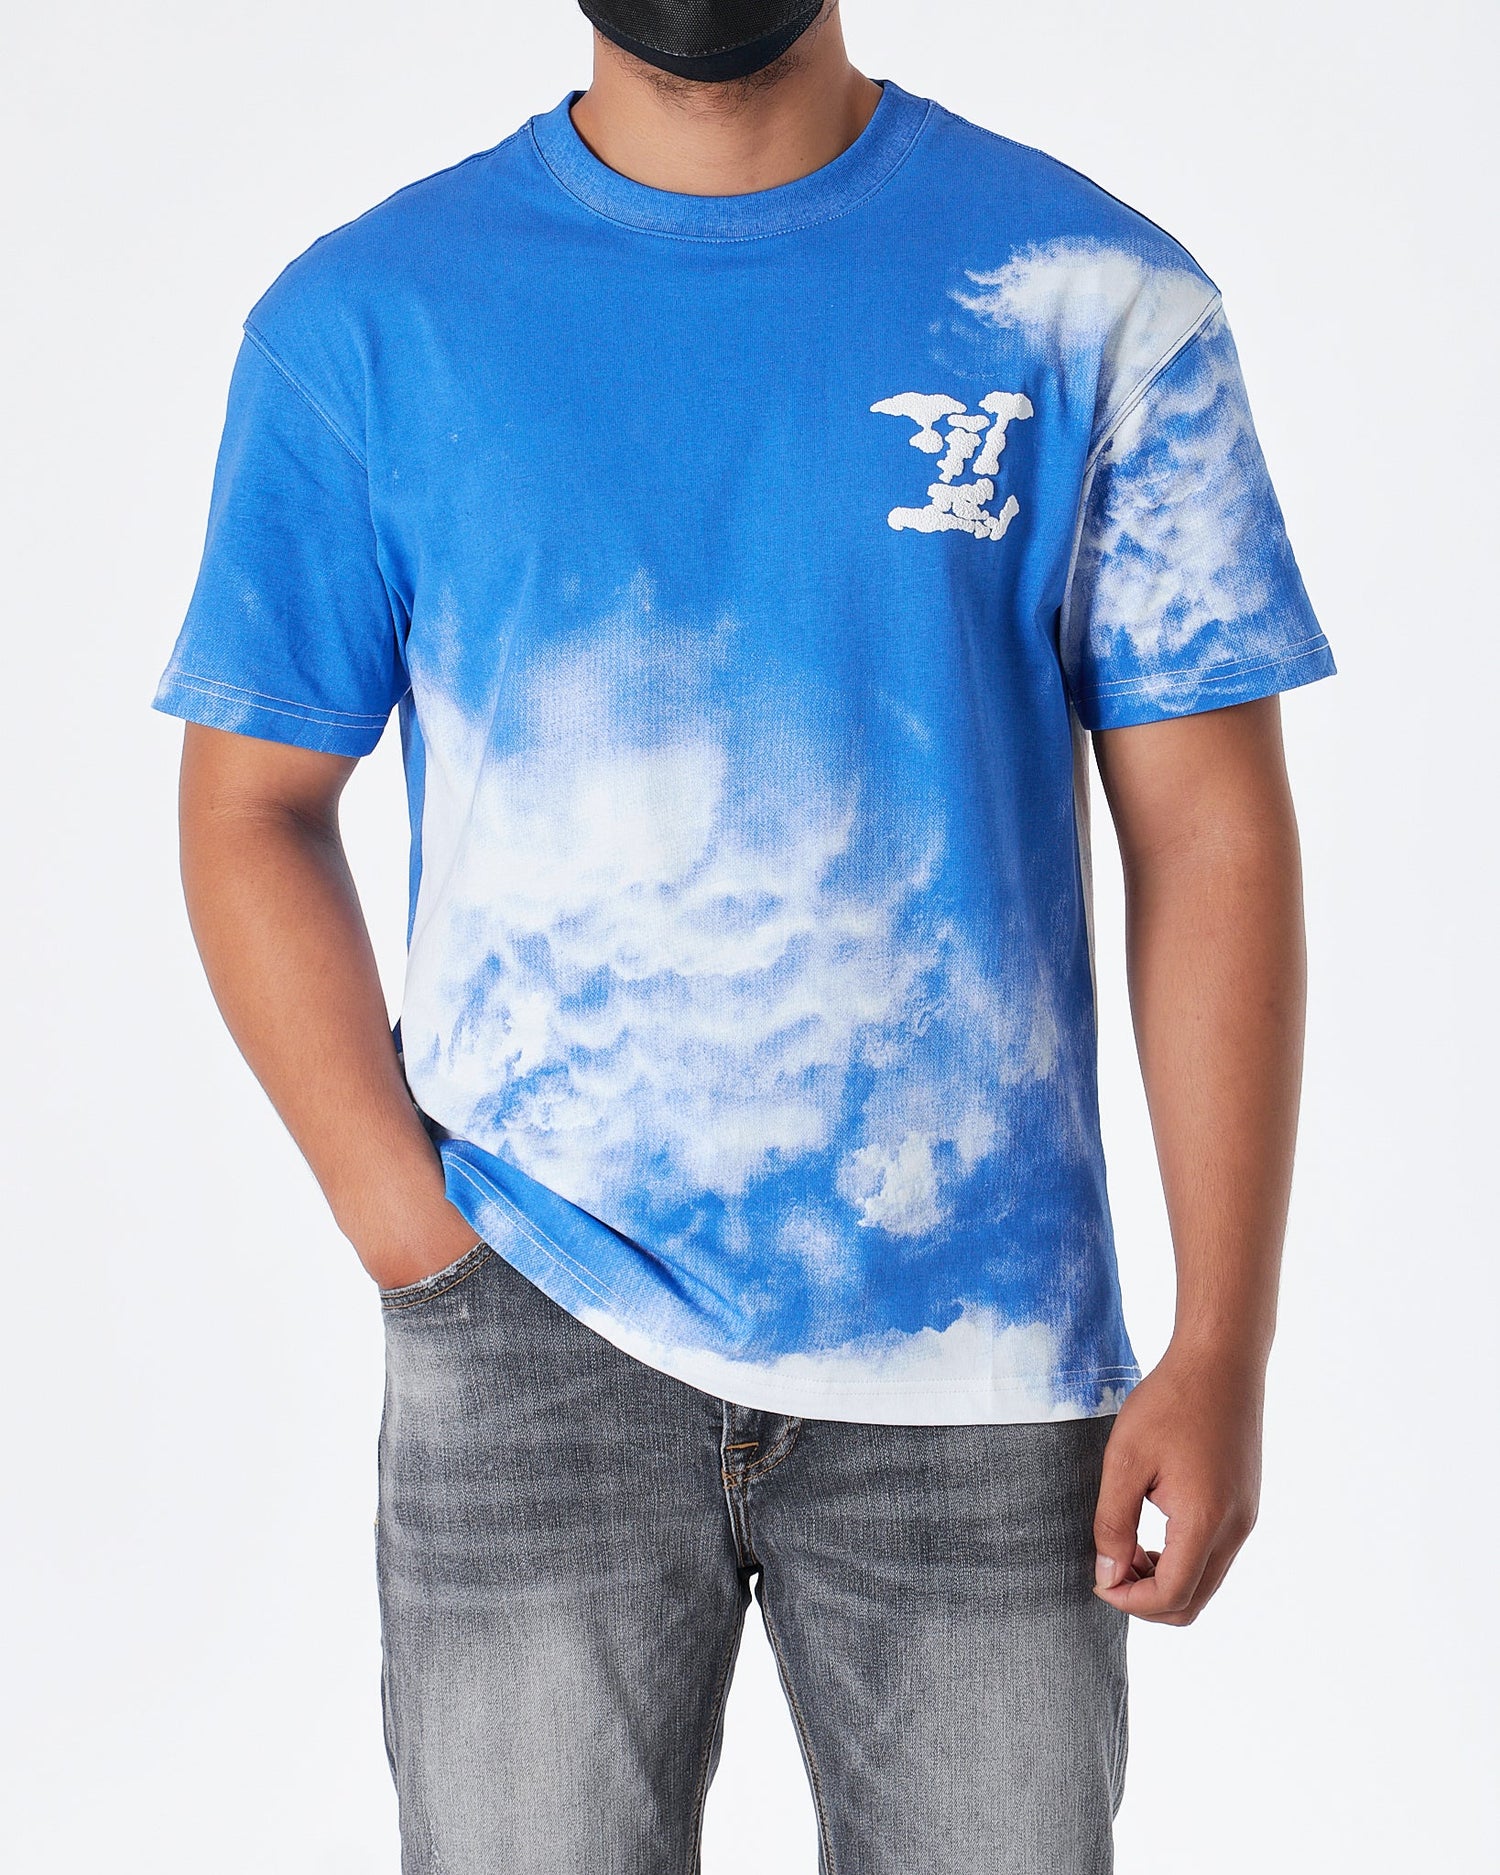 MOI OUTFIT-LV Cloudy Printed Men T-Shirt 52.90